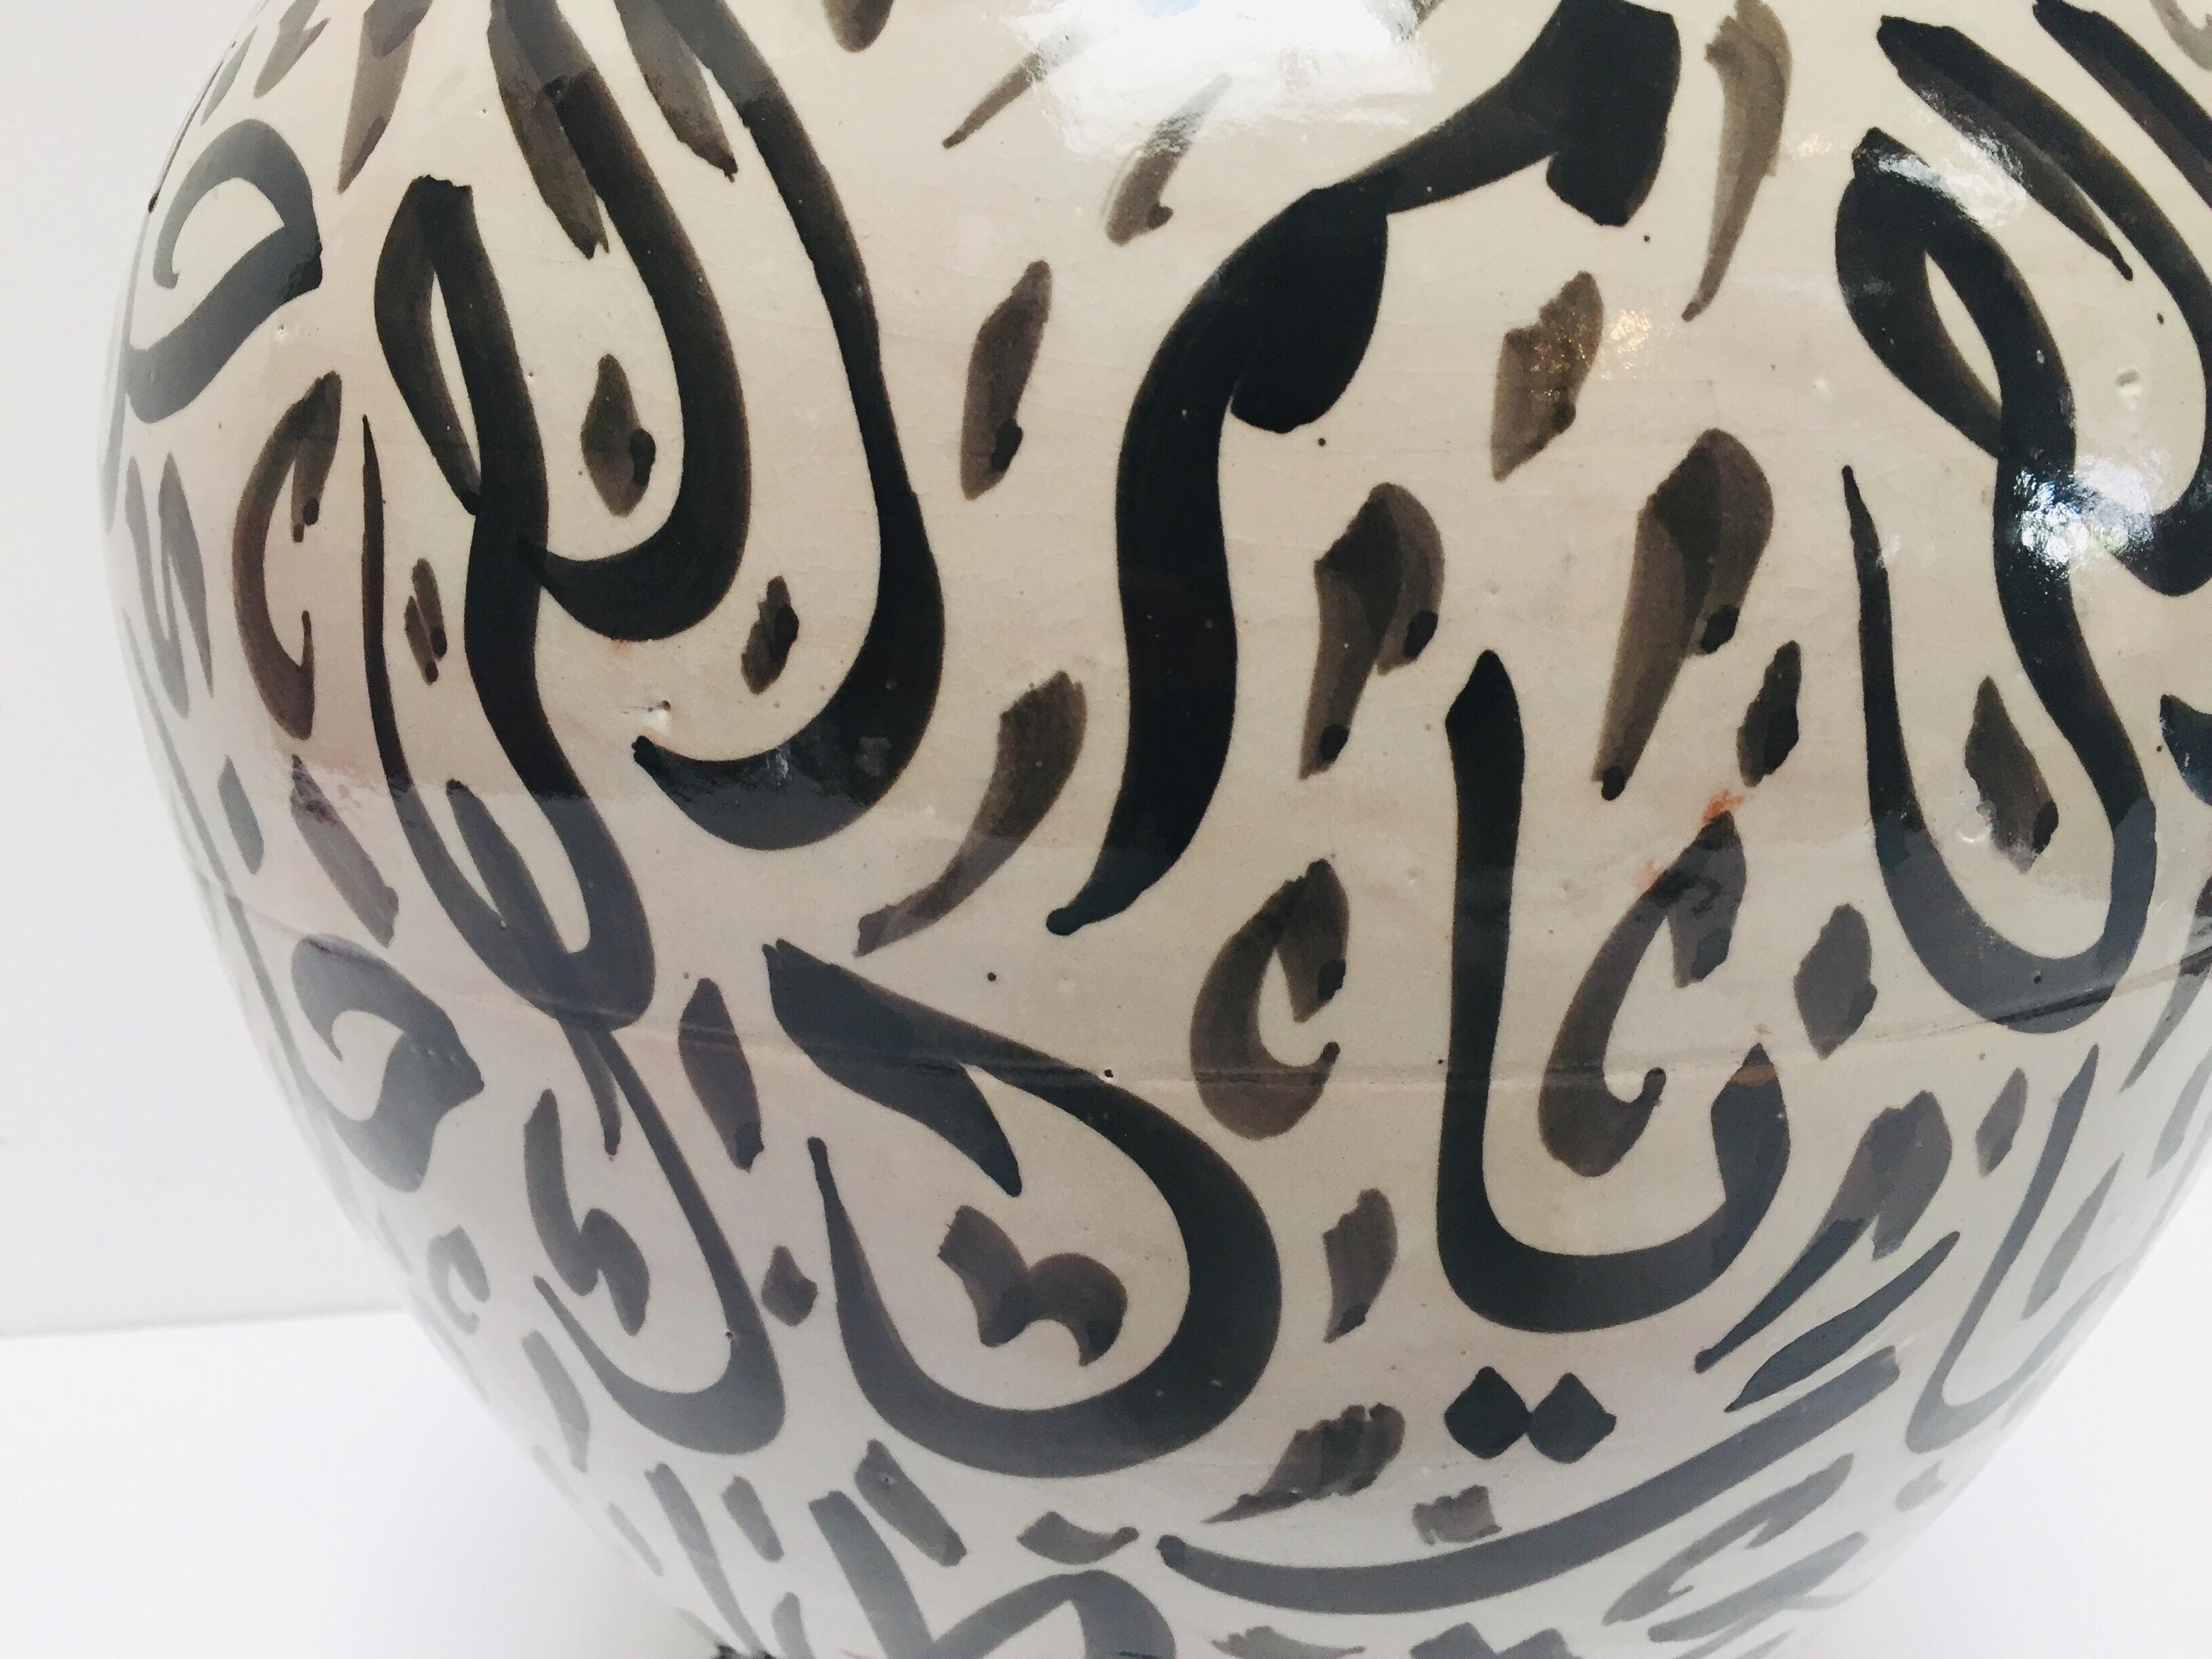 Large Moroccan Glazed Ceramic Vase with Arabic Calligraphy Brown Writing, Fez 9